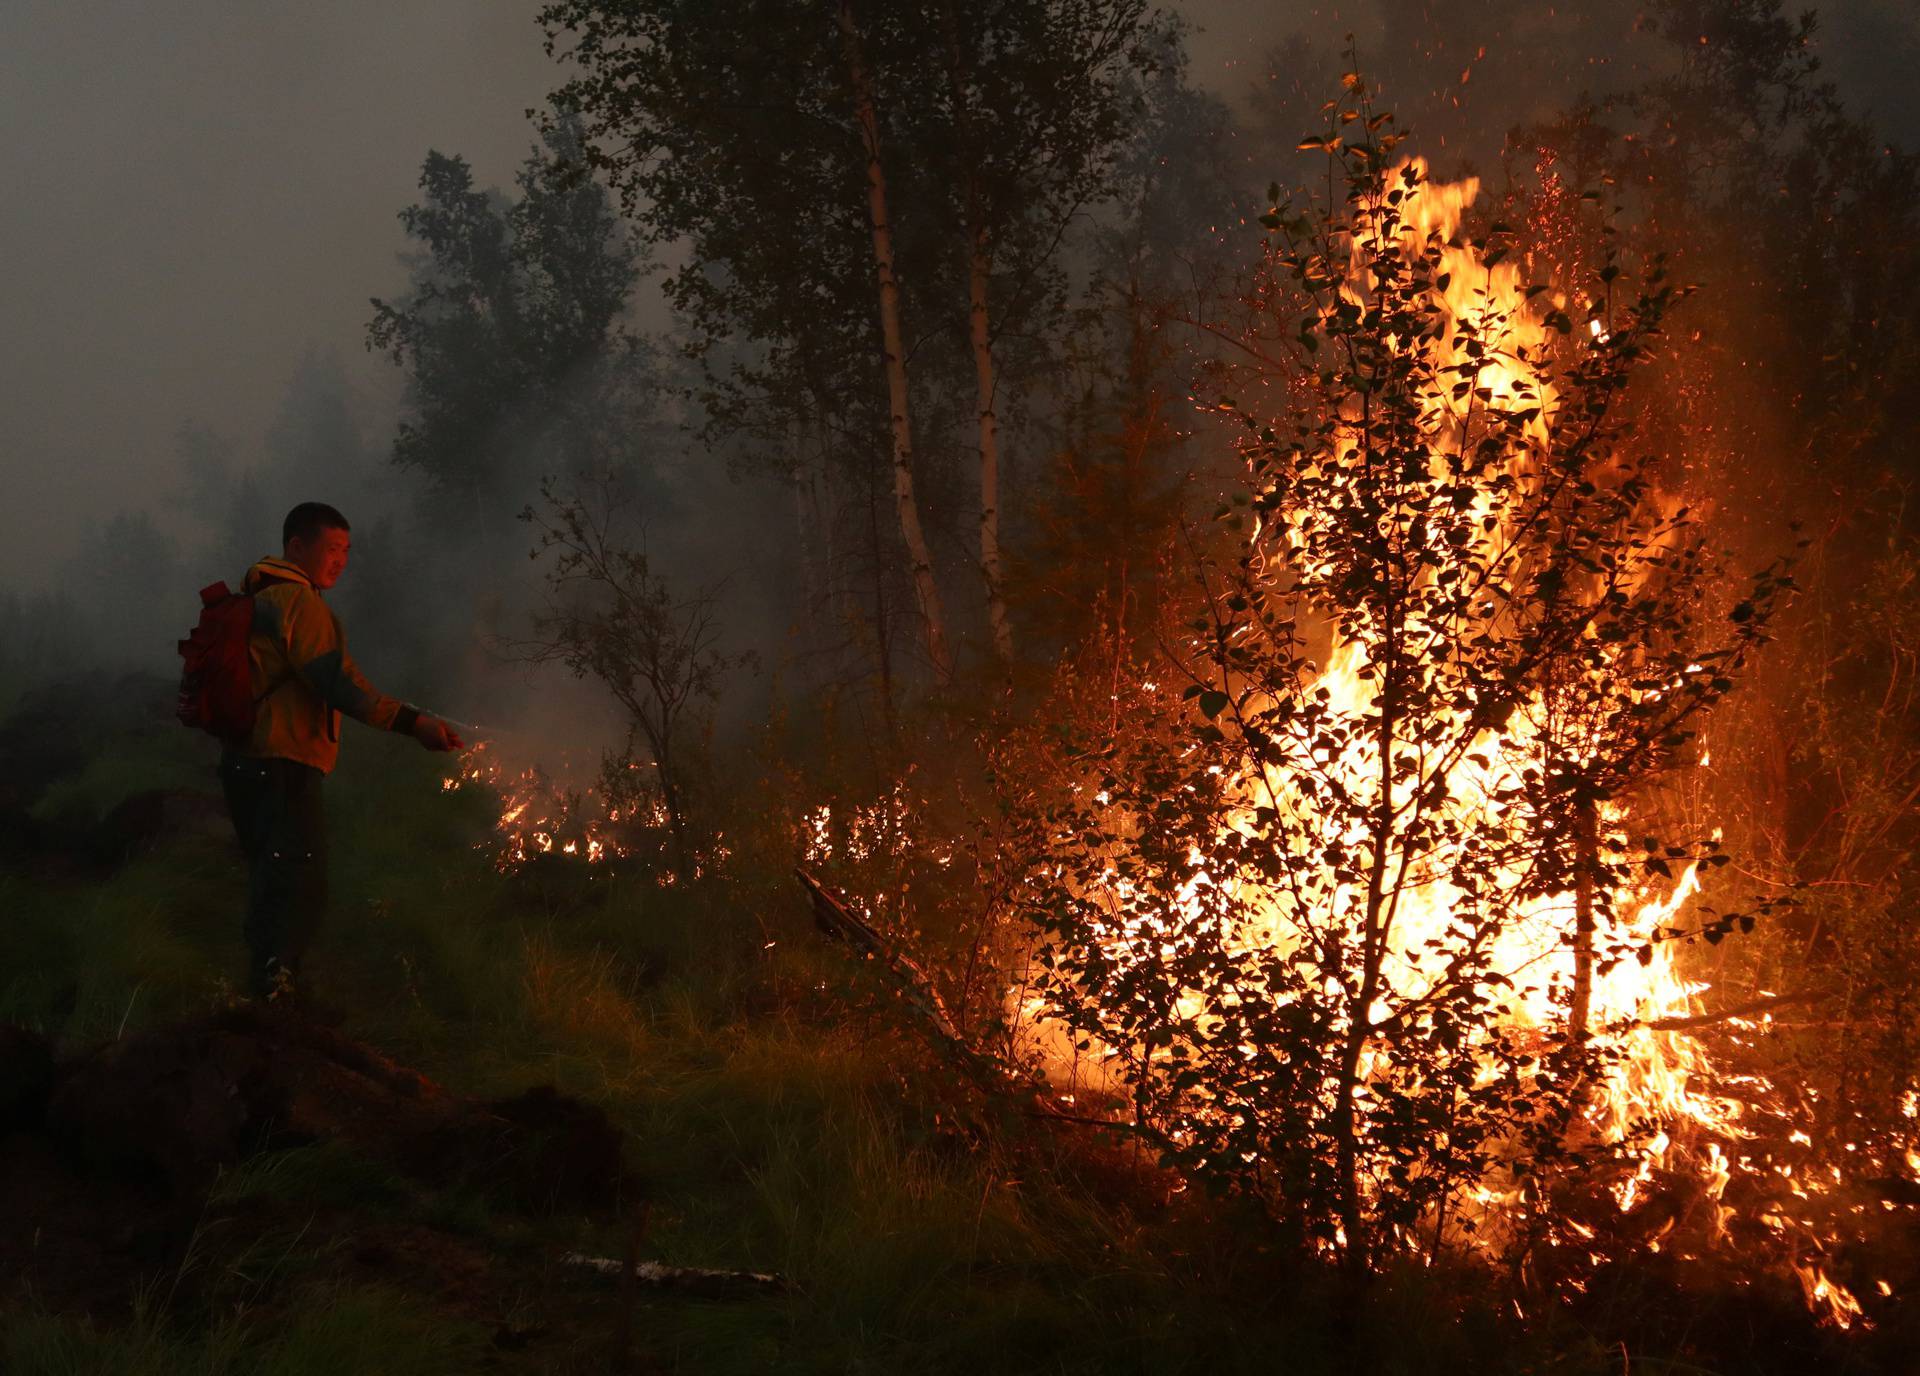 A firefighter works to extinguish a forest fire in Yakutia